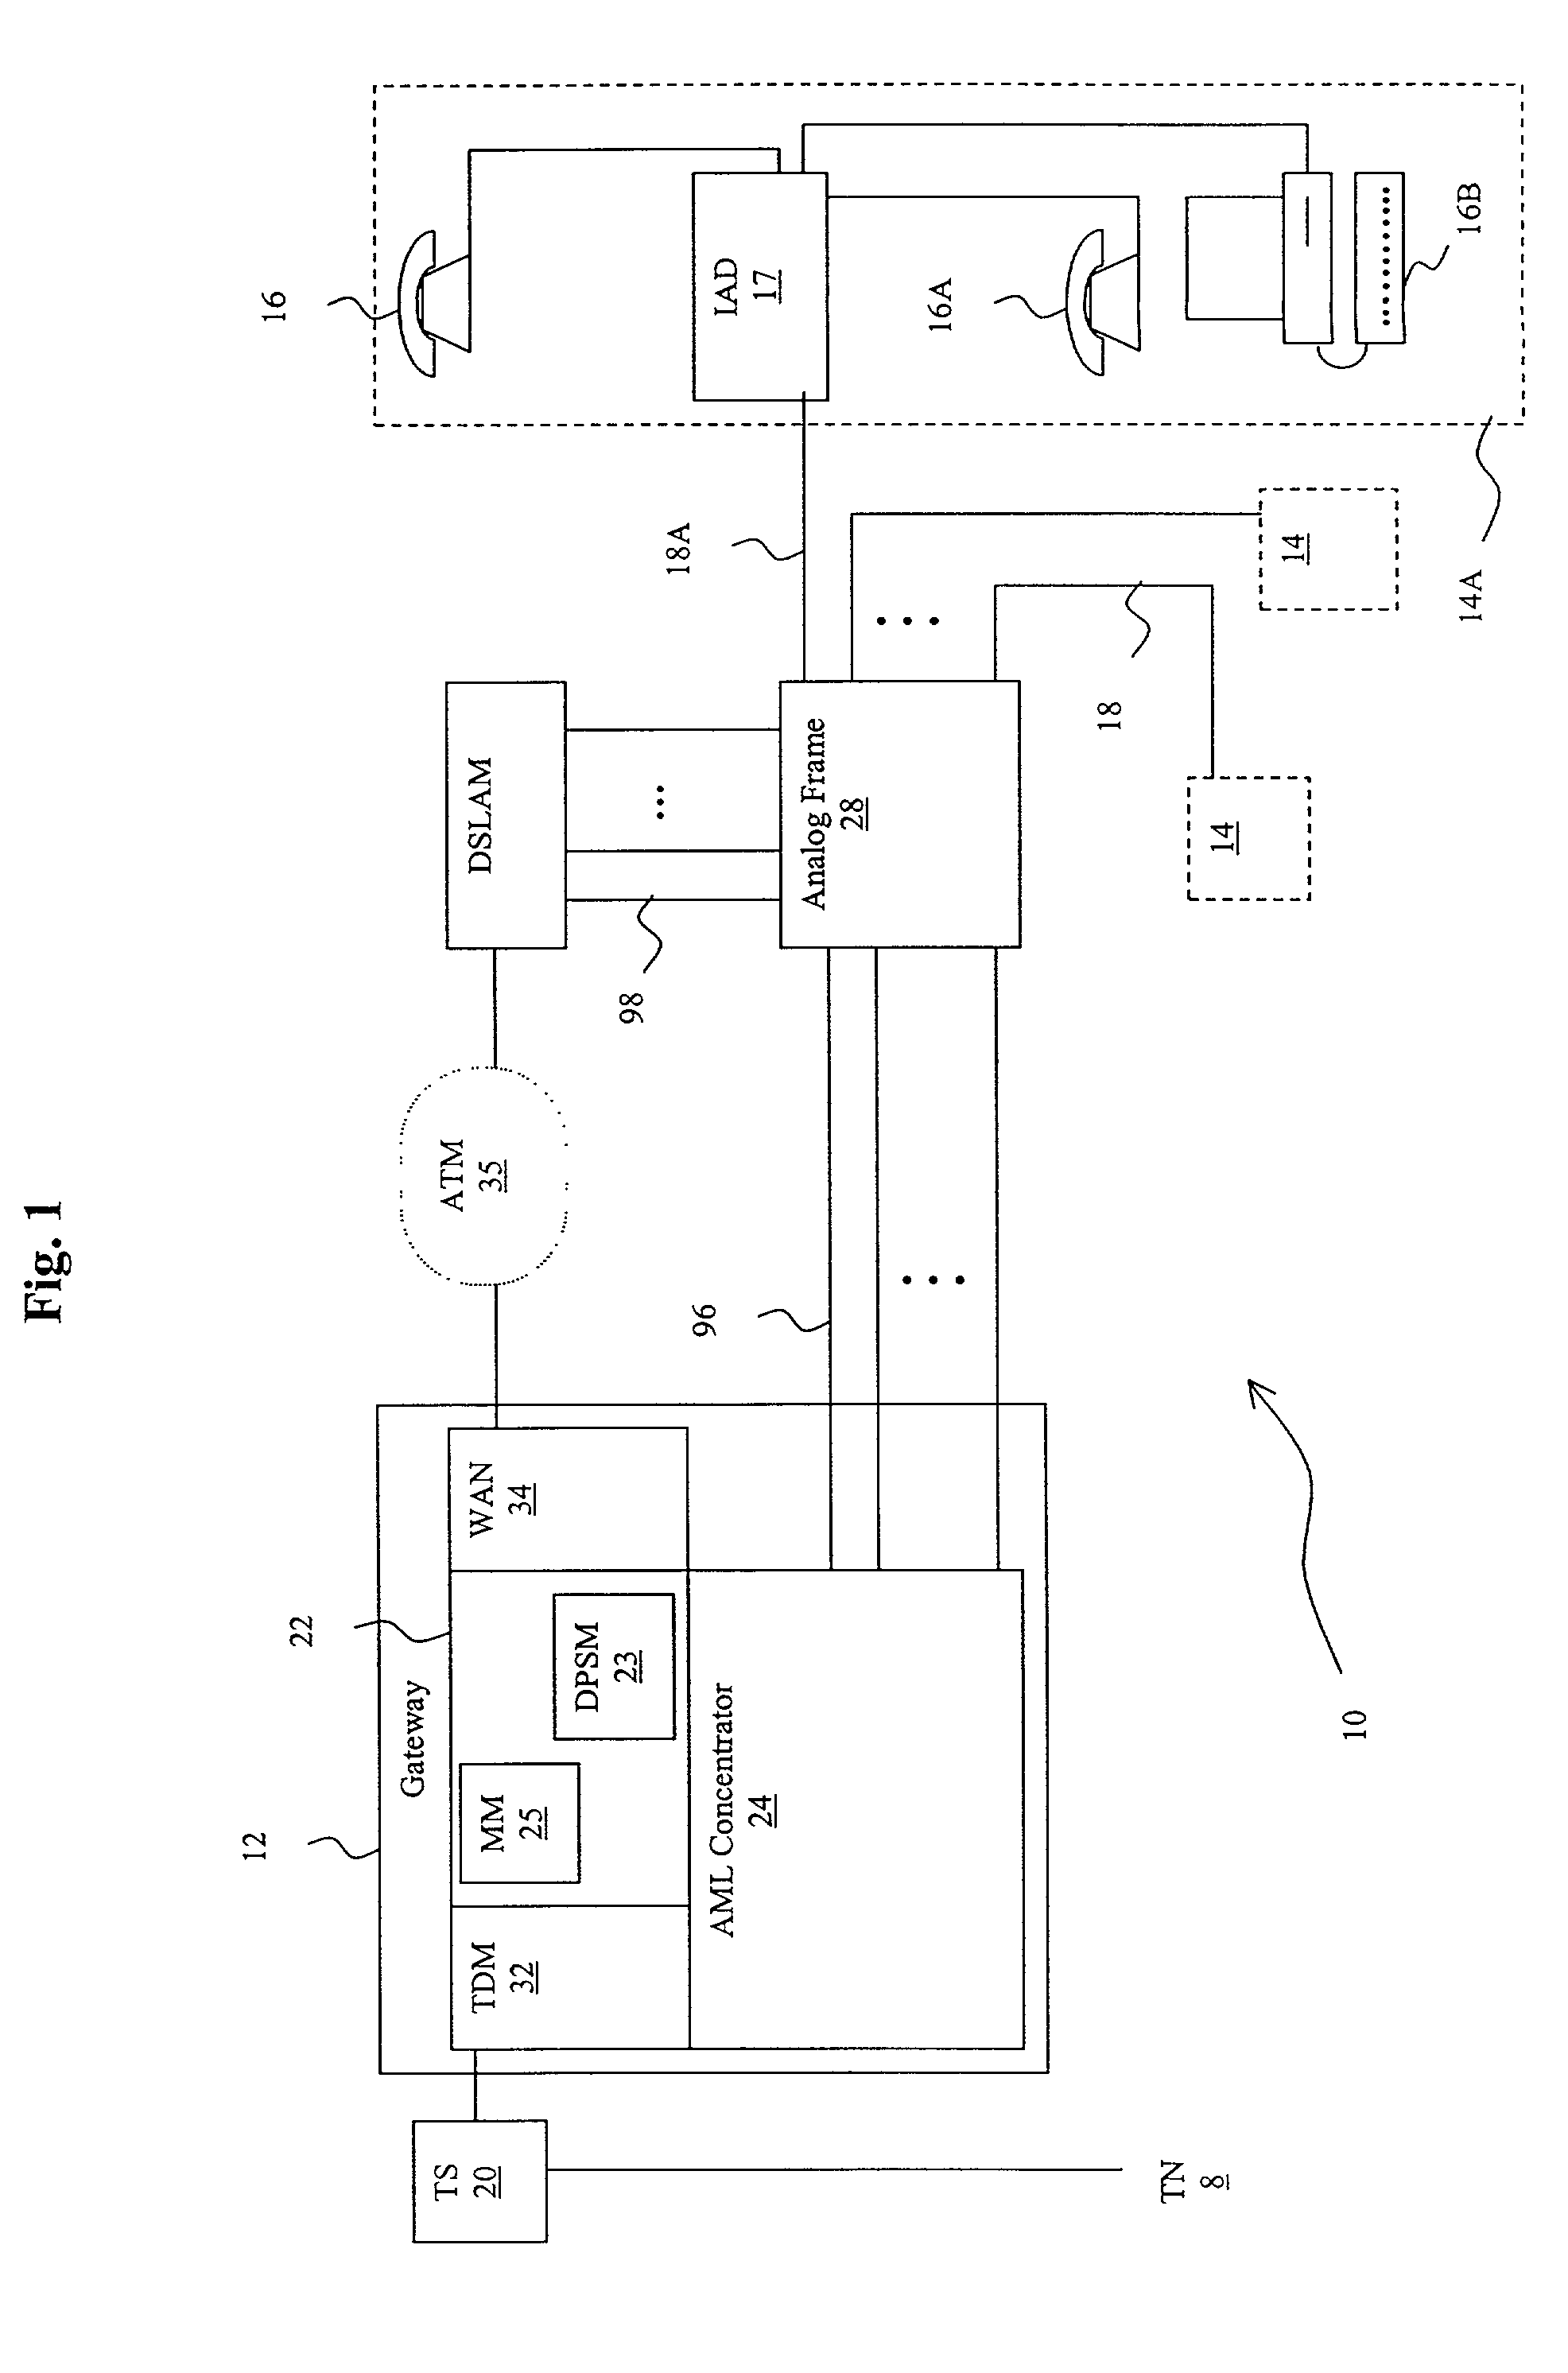 System and method for reliably communicating telecommunication information